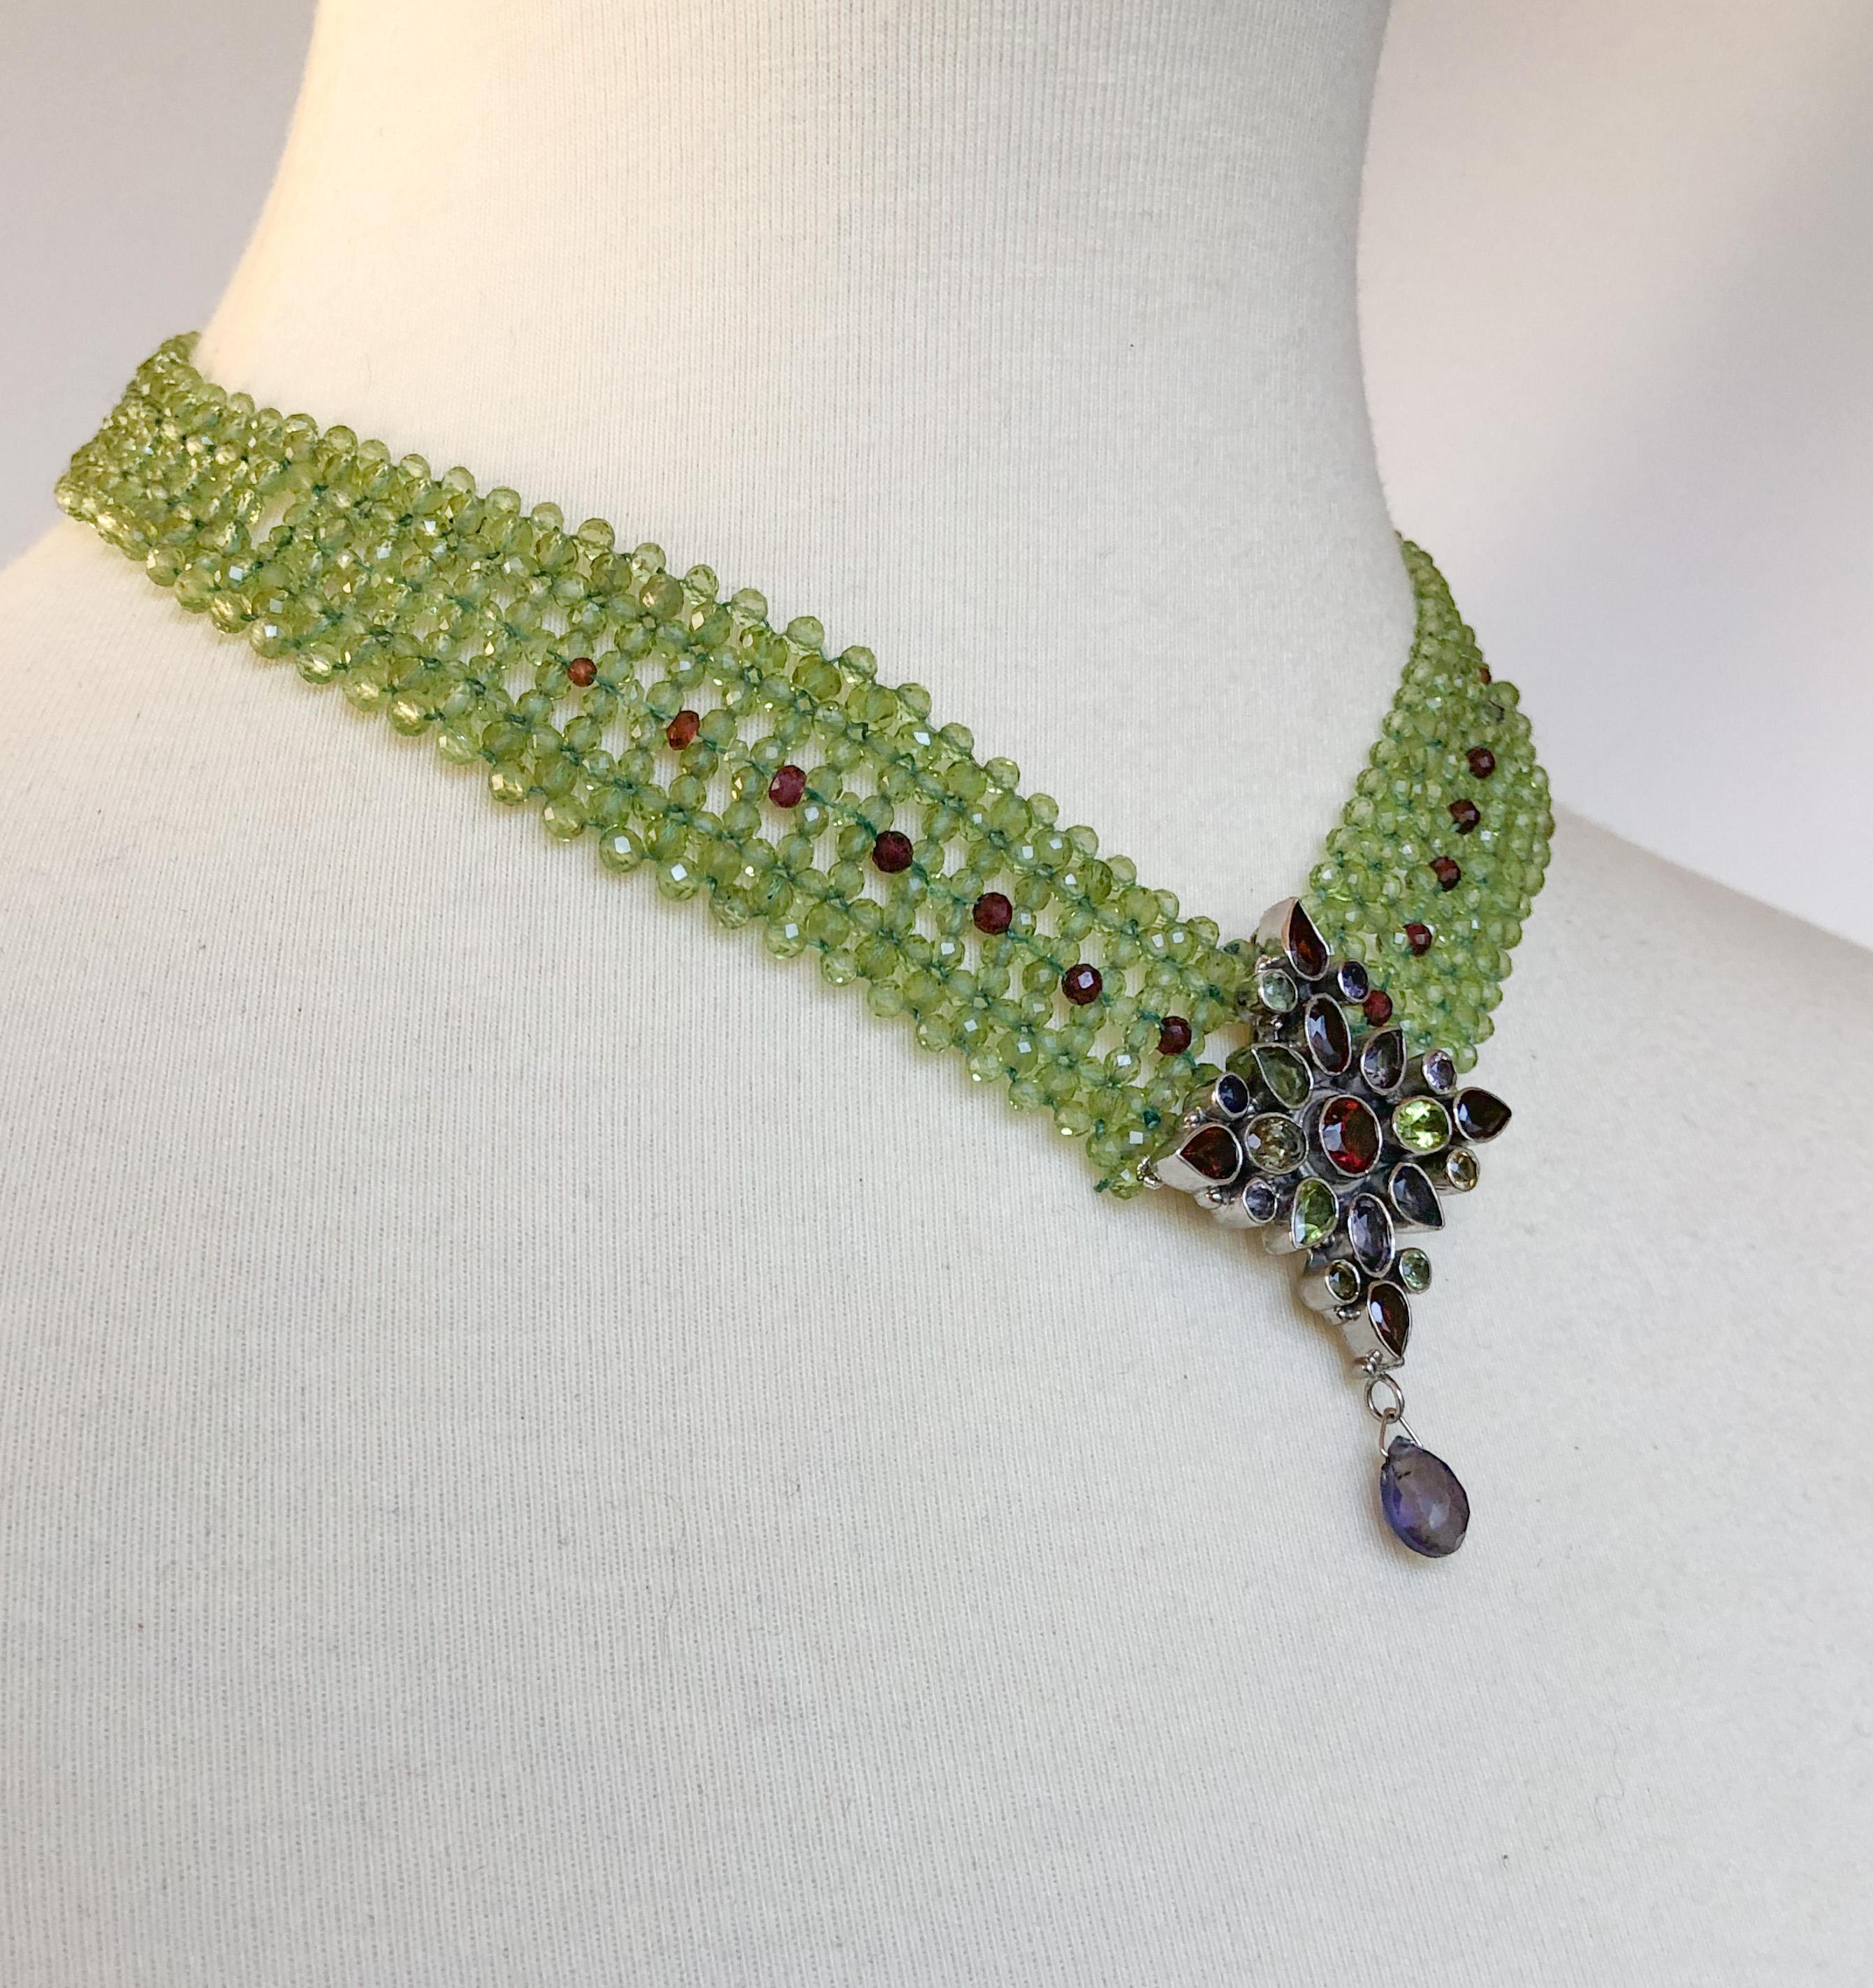 This beautiful necklace is hand woven with different sized peridot beads and some graduated garnet beads to match the centerpiece. The rhodium plated silver centerpiece is made with peridot, garnet, iolite and kyanite, with a small kyanite drop